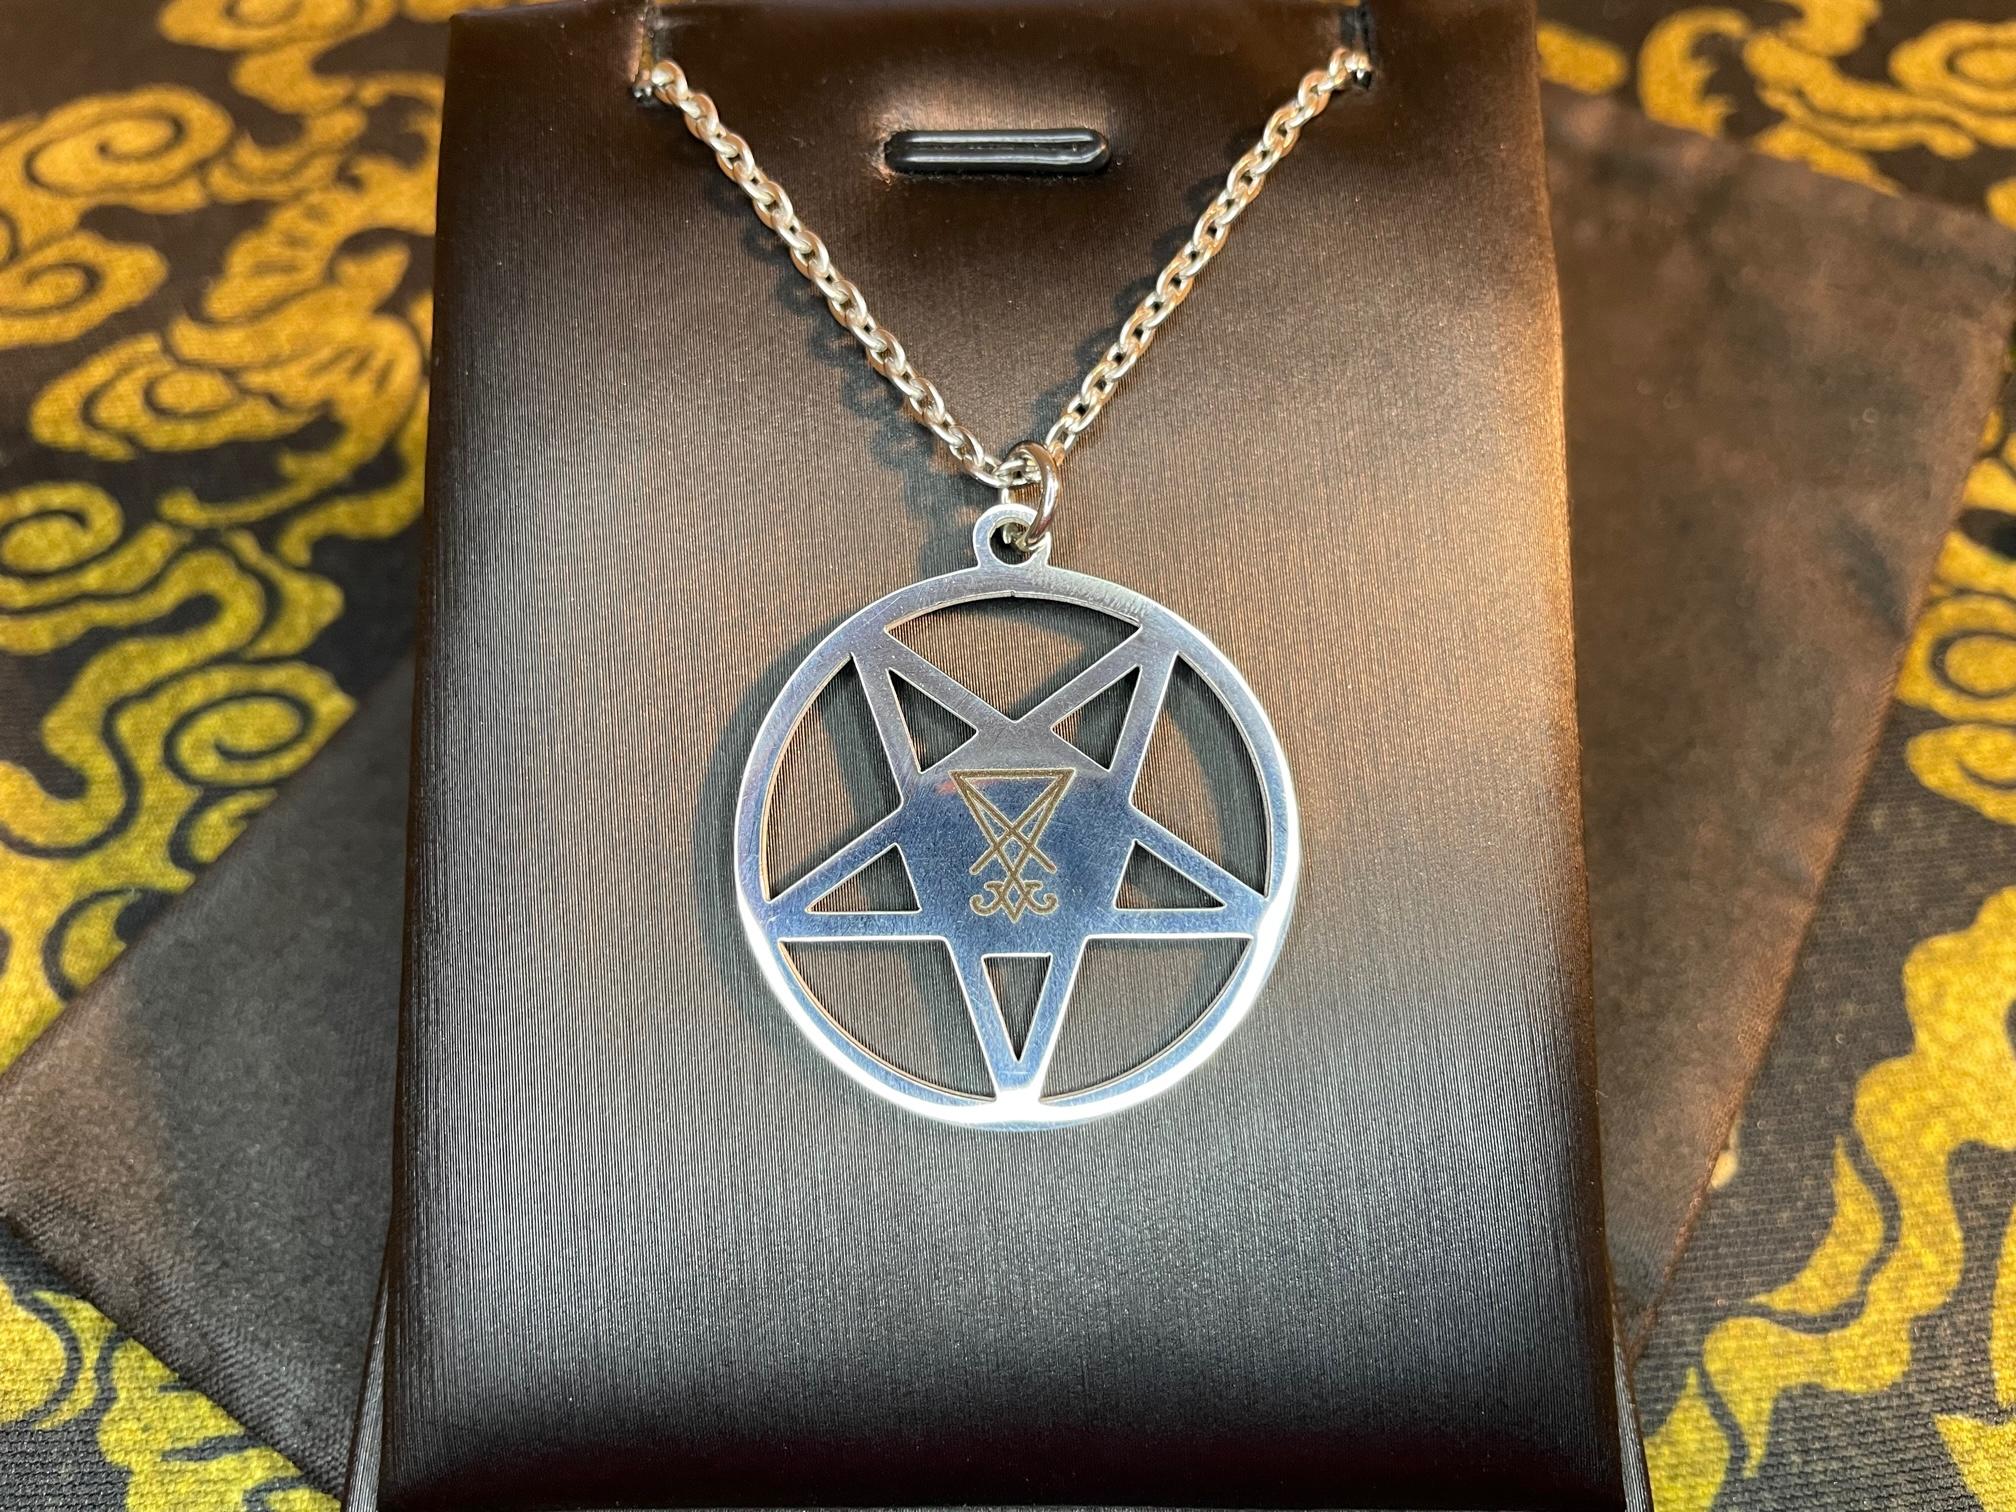 Inverted Pentagram Sigil of Lucifer Upside Down Stainless Steel Pendant Necklace Satanic Gothic Pagan Wiccan Druid Darkness Jewelry Silver